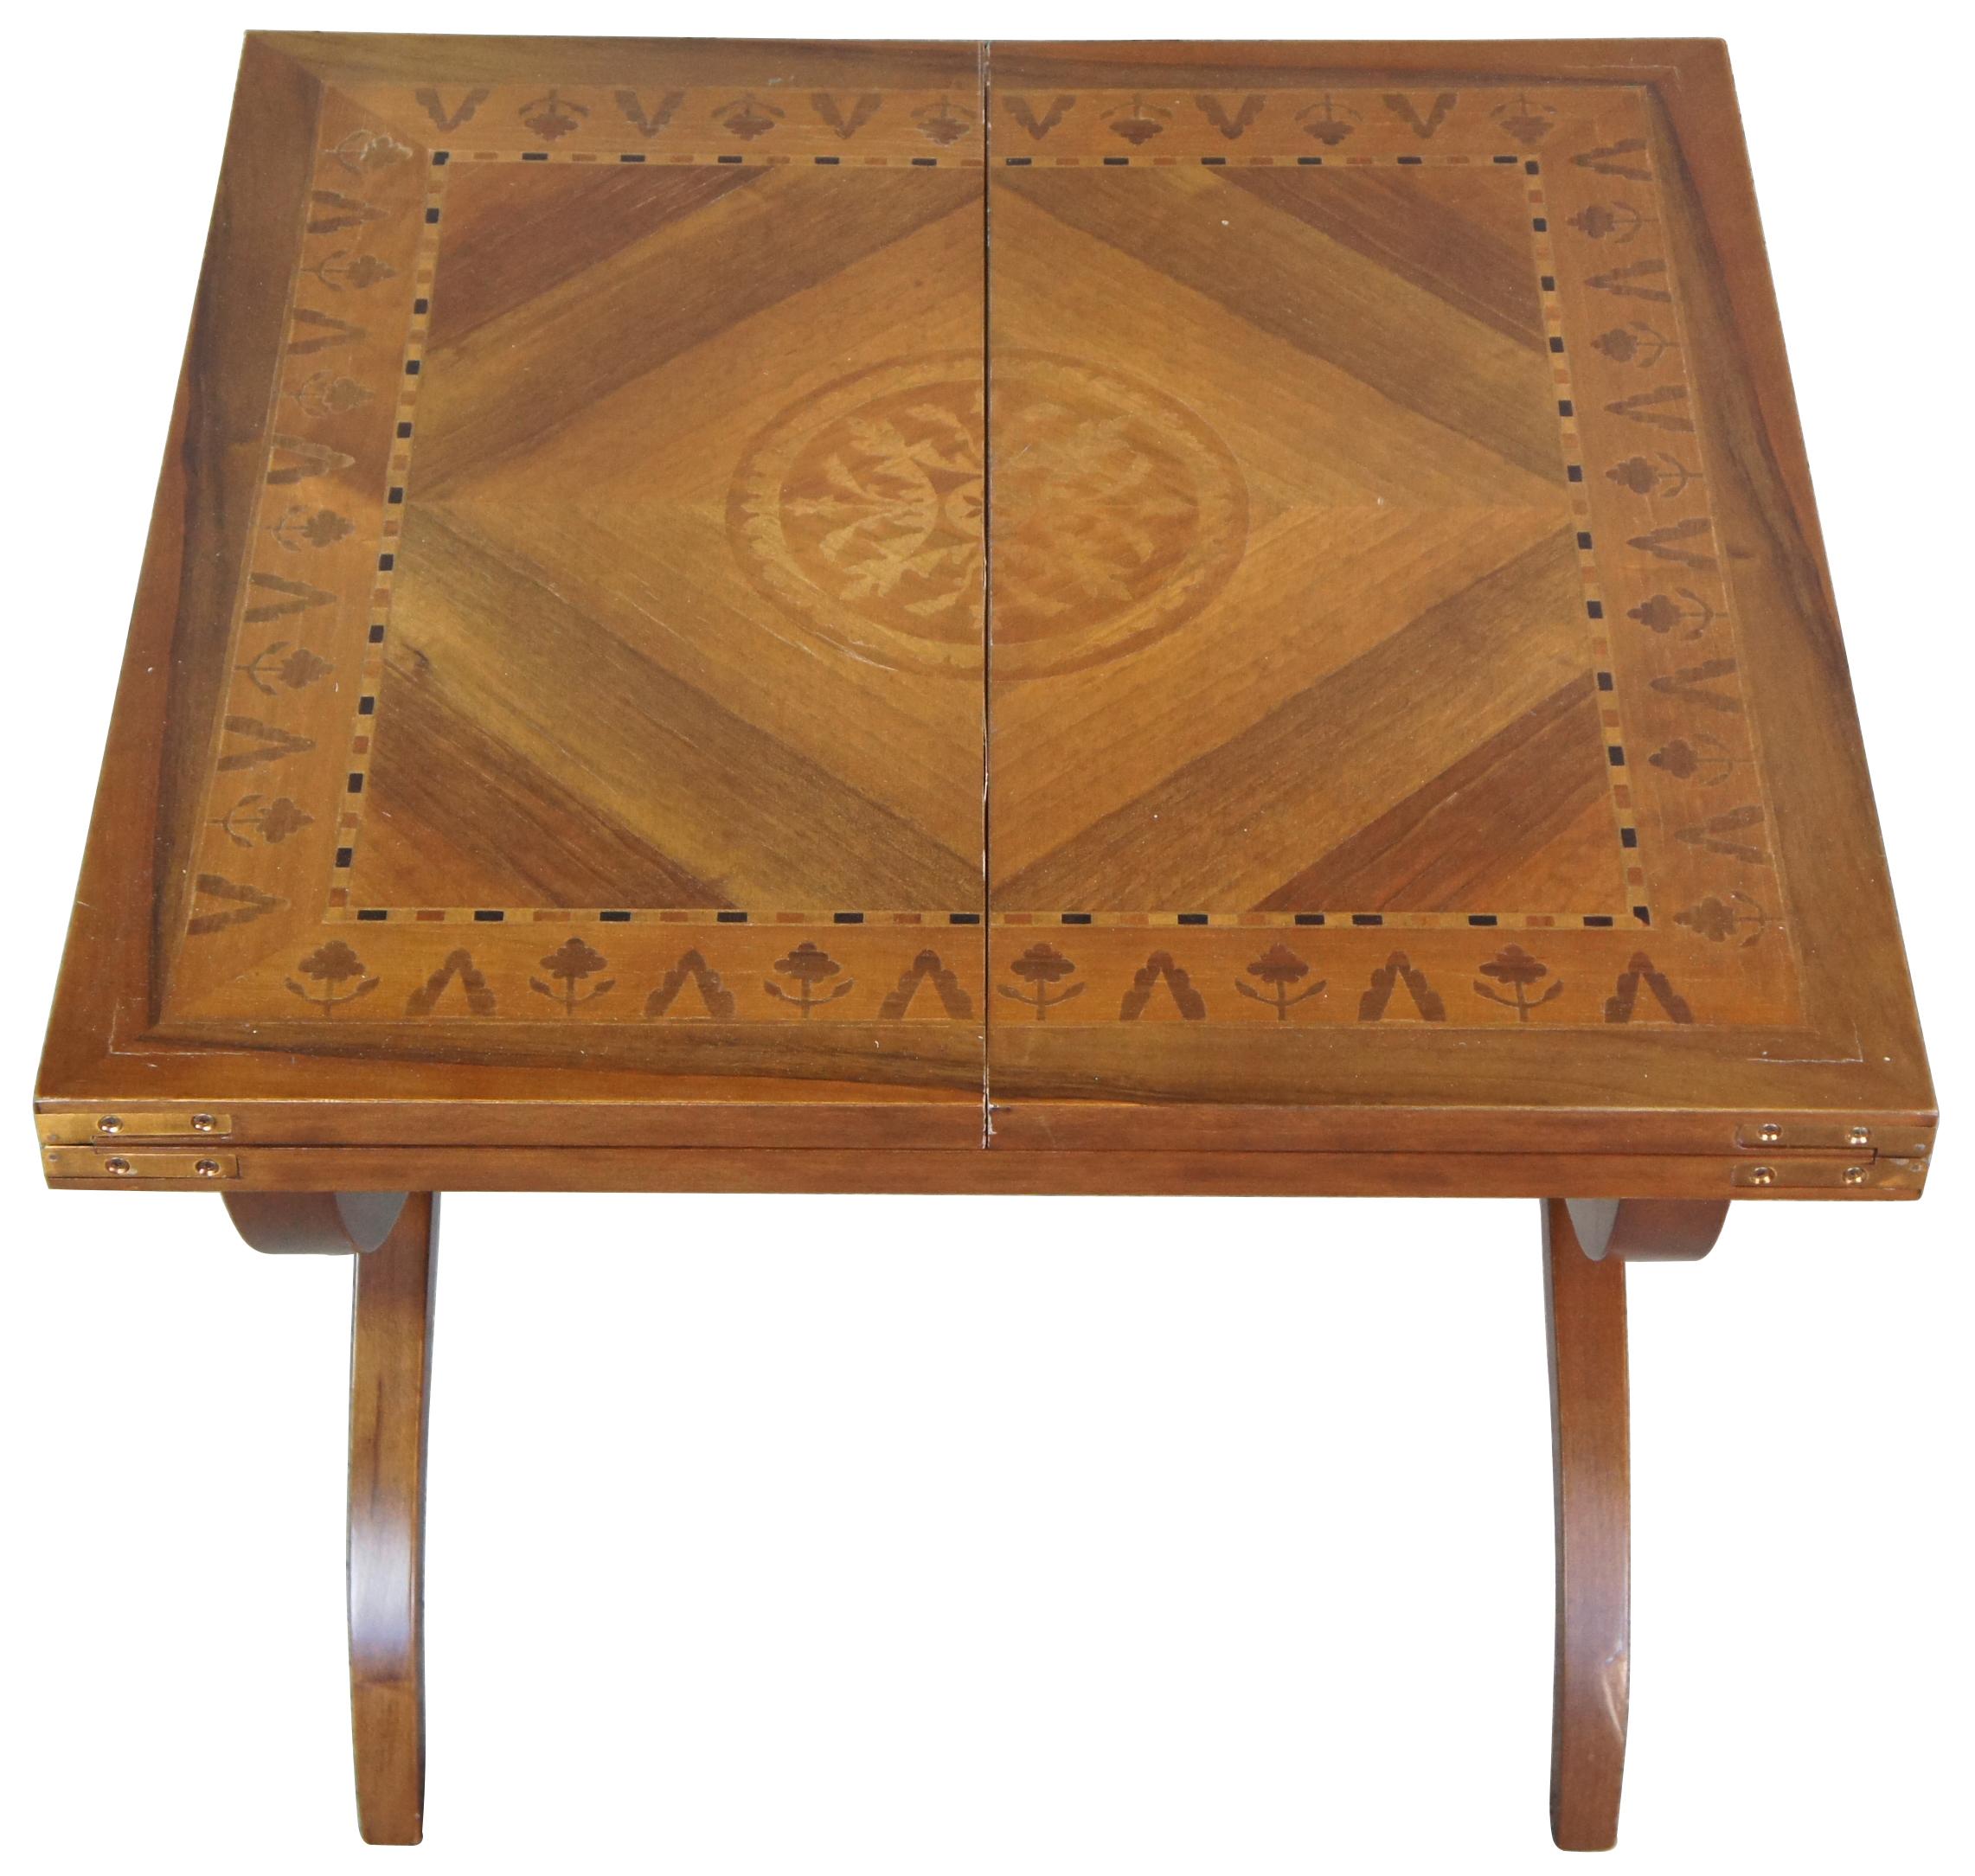 Mid 20th century flip top marquetry coffee table. Made in Italy style 8506 featuring square or rectangular form with floral and geometric matchbook inlays, central medallion and serpentine X base with turned stretcher.

Provenance: Estate of Carol